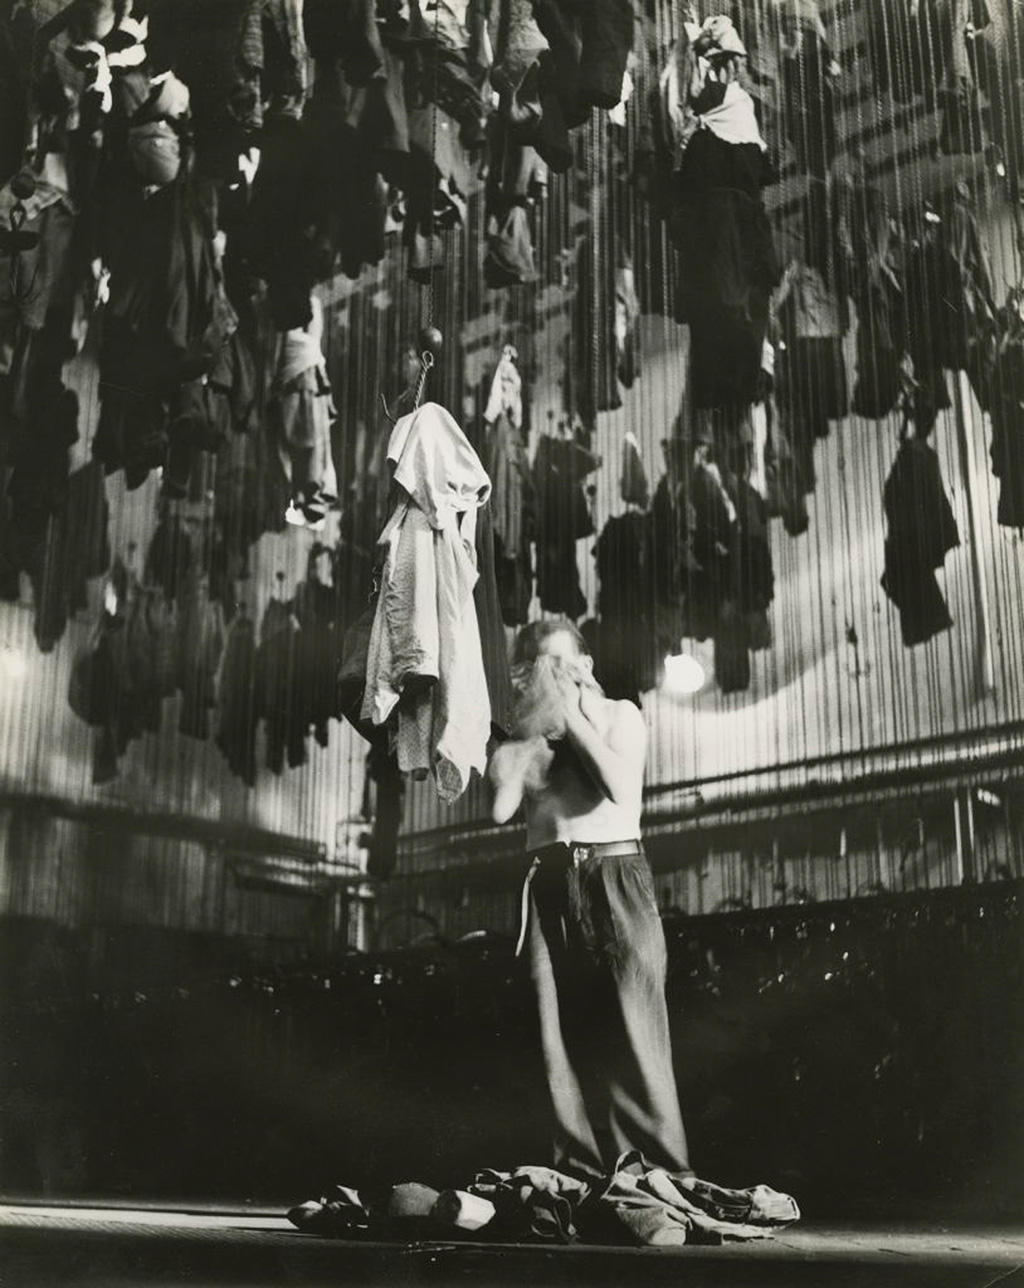 A man wipes his face while standing in a room where clothes are hoisted on cables above his head.